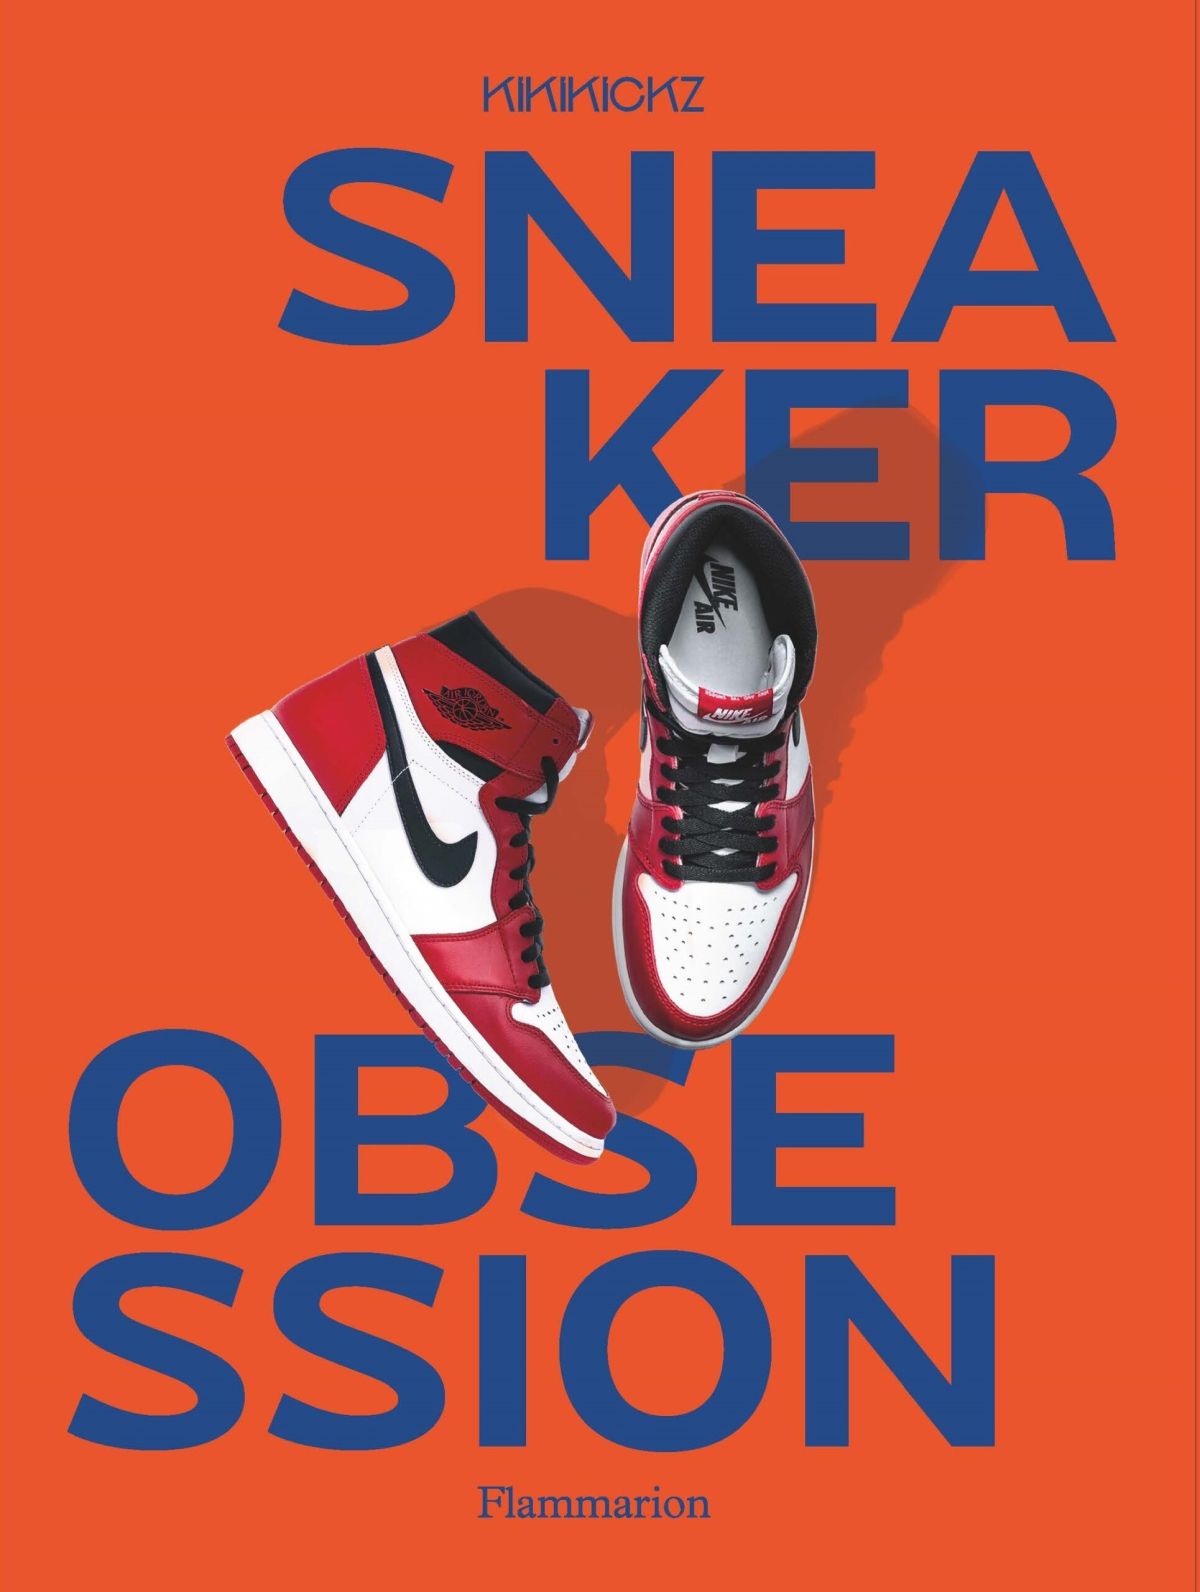 Where do sneakers stand in 2023?